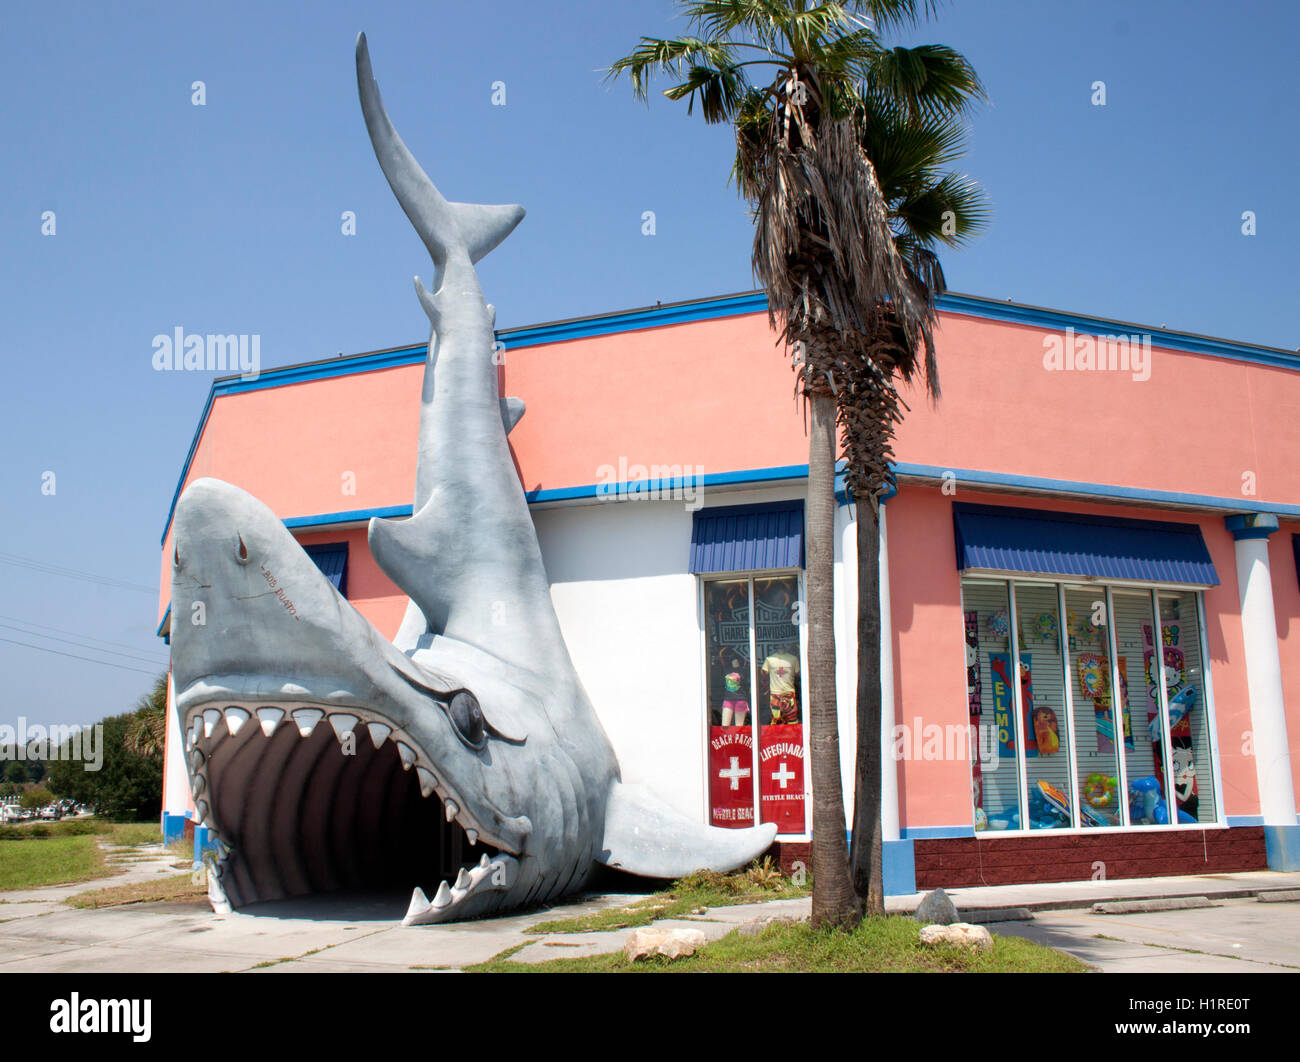 Giant Shark entrance at a store in Myrtle Beach South Carolina Stock Photo